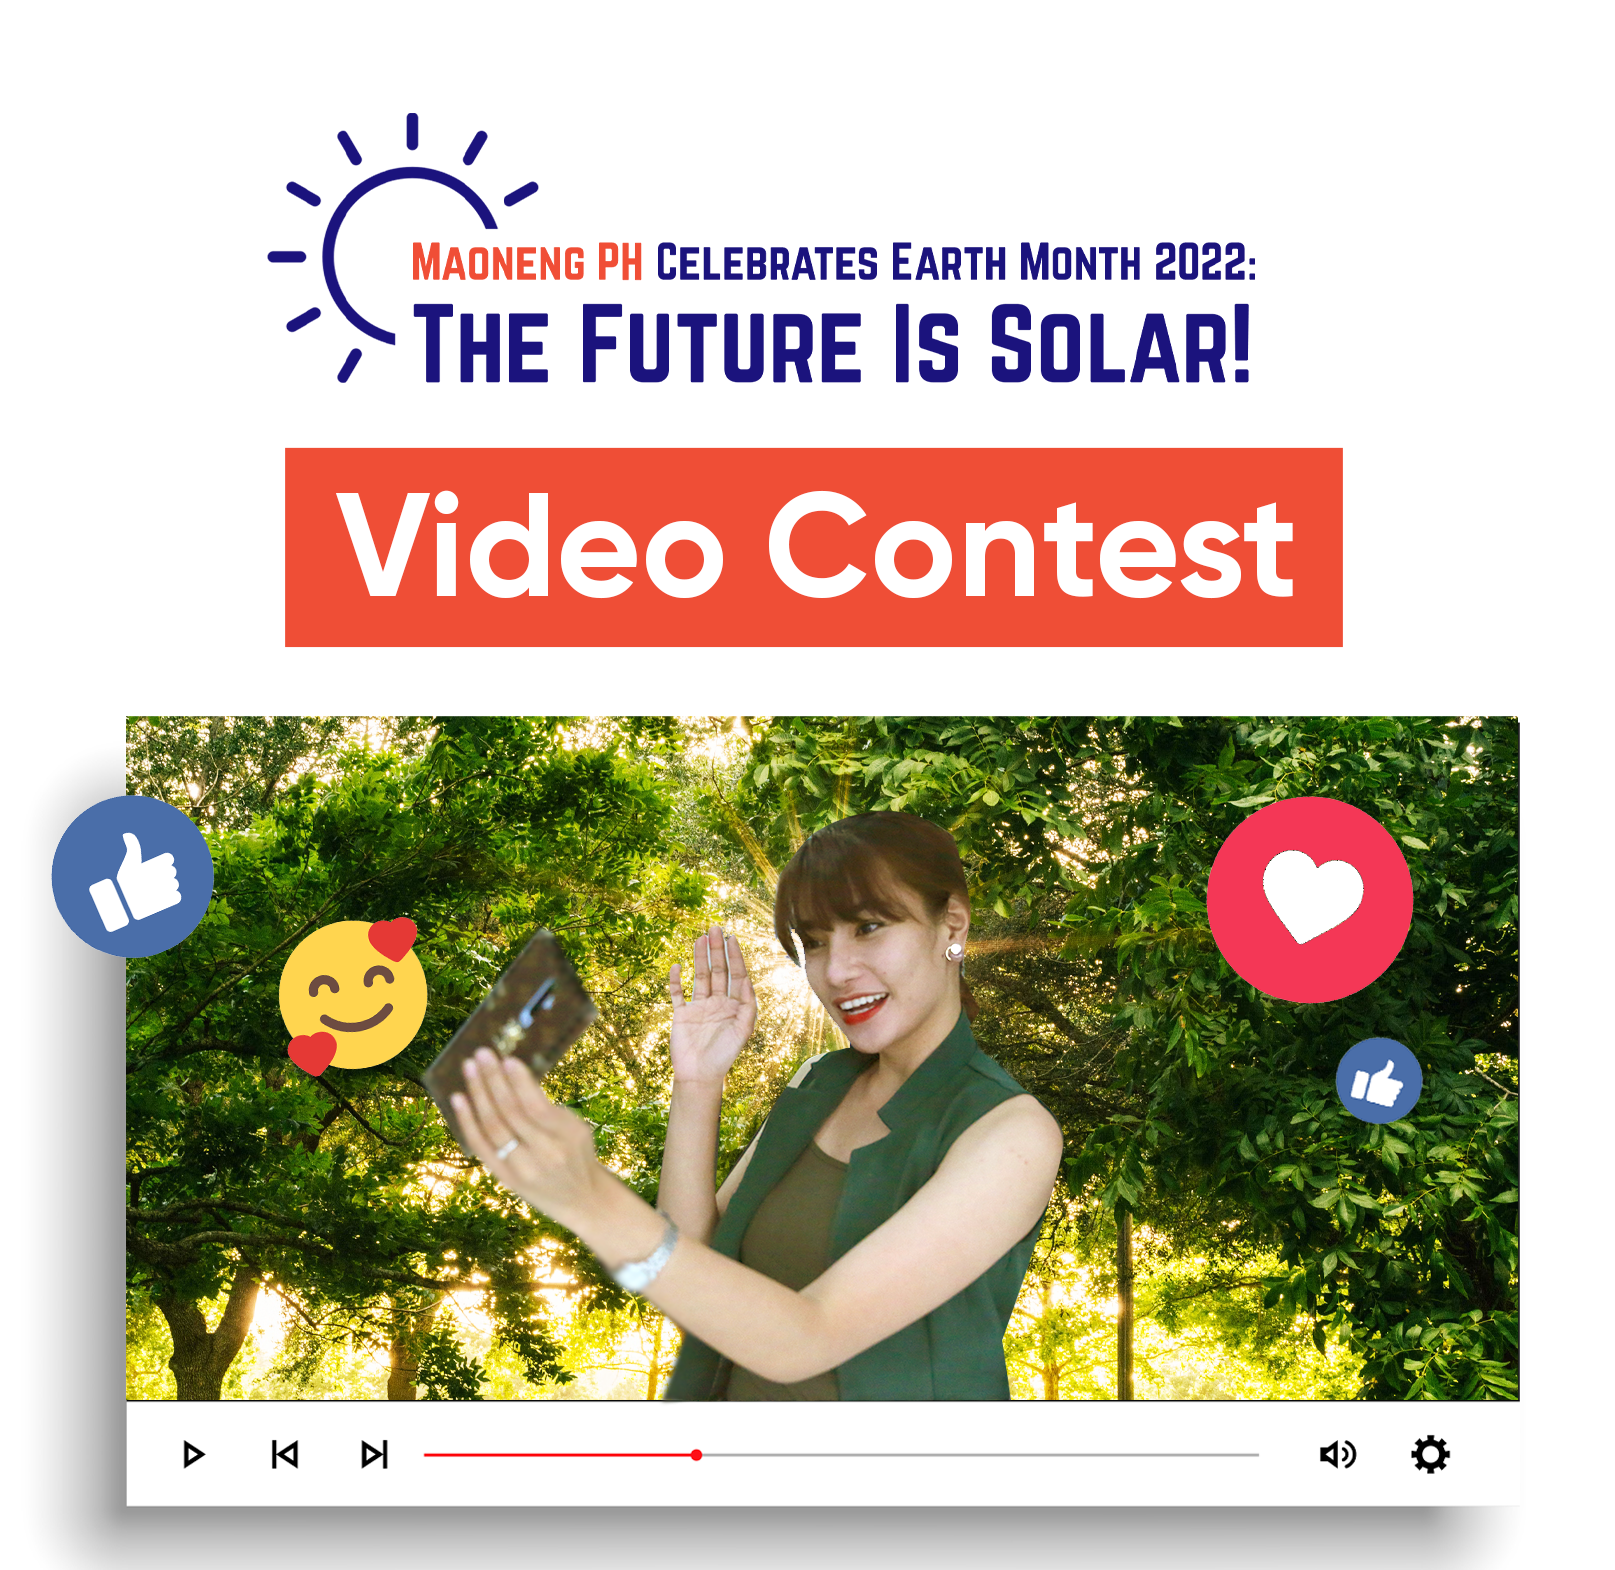 Maoneng PH launches Video Contest for Earth Month